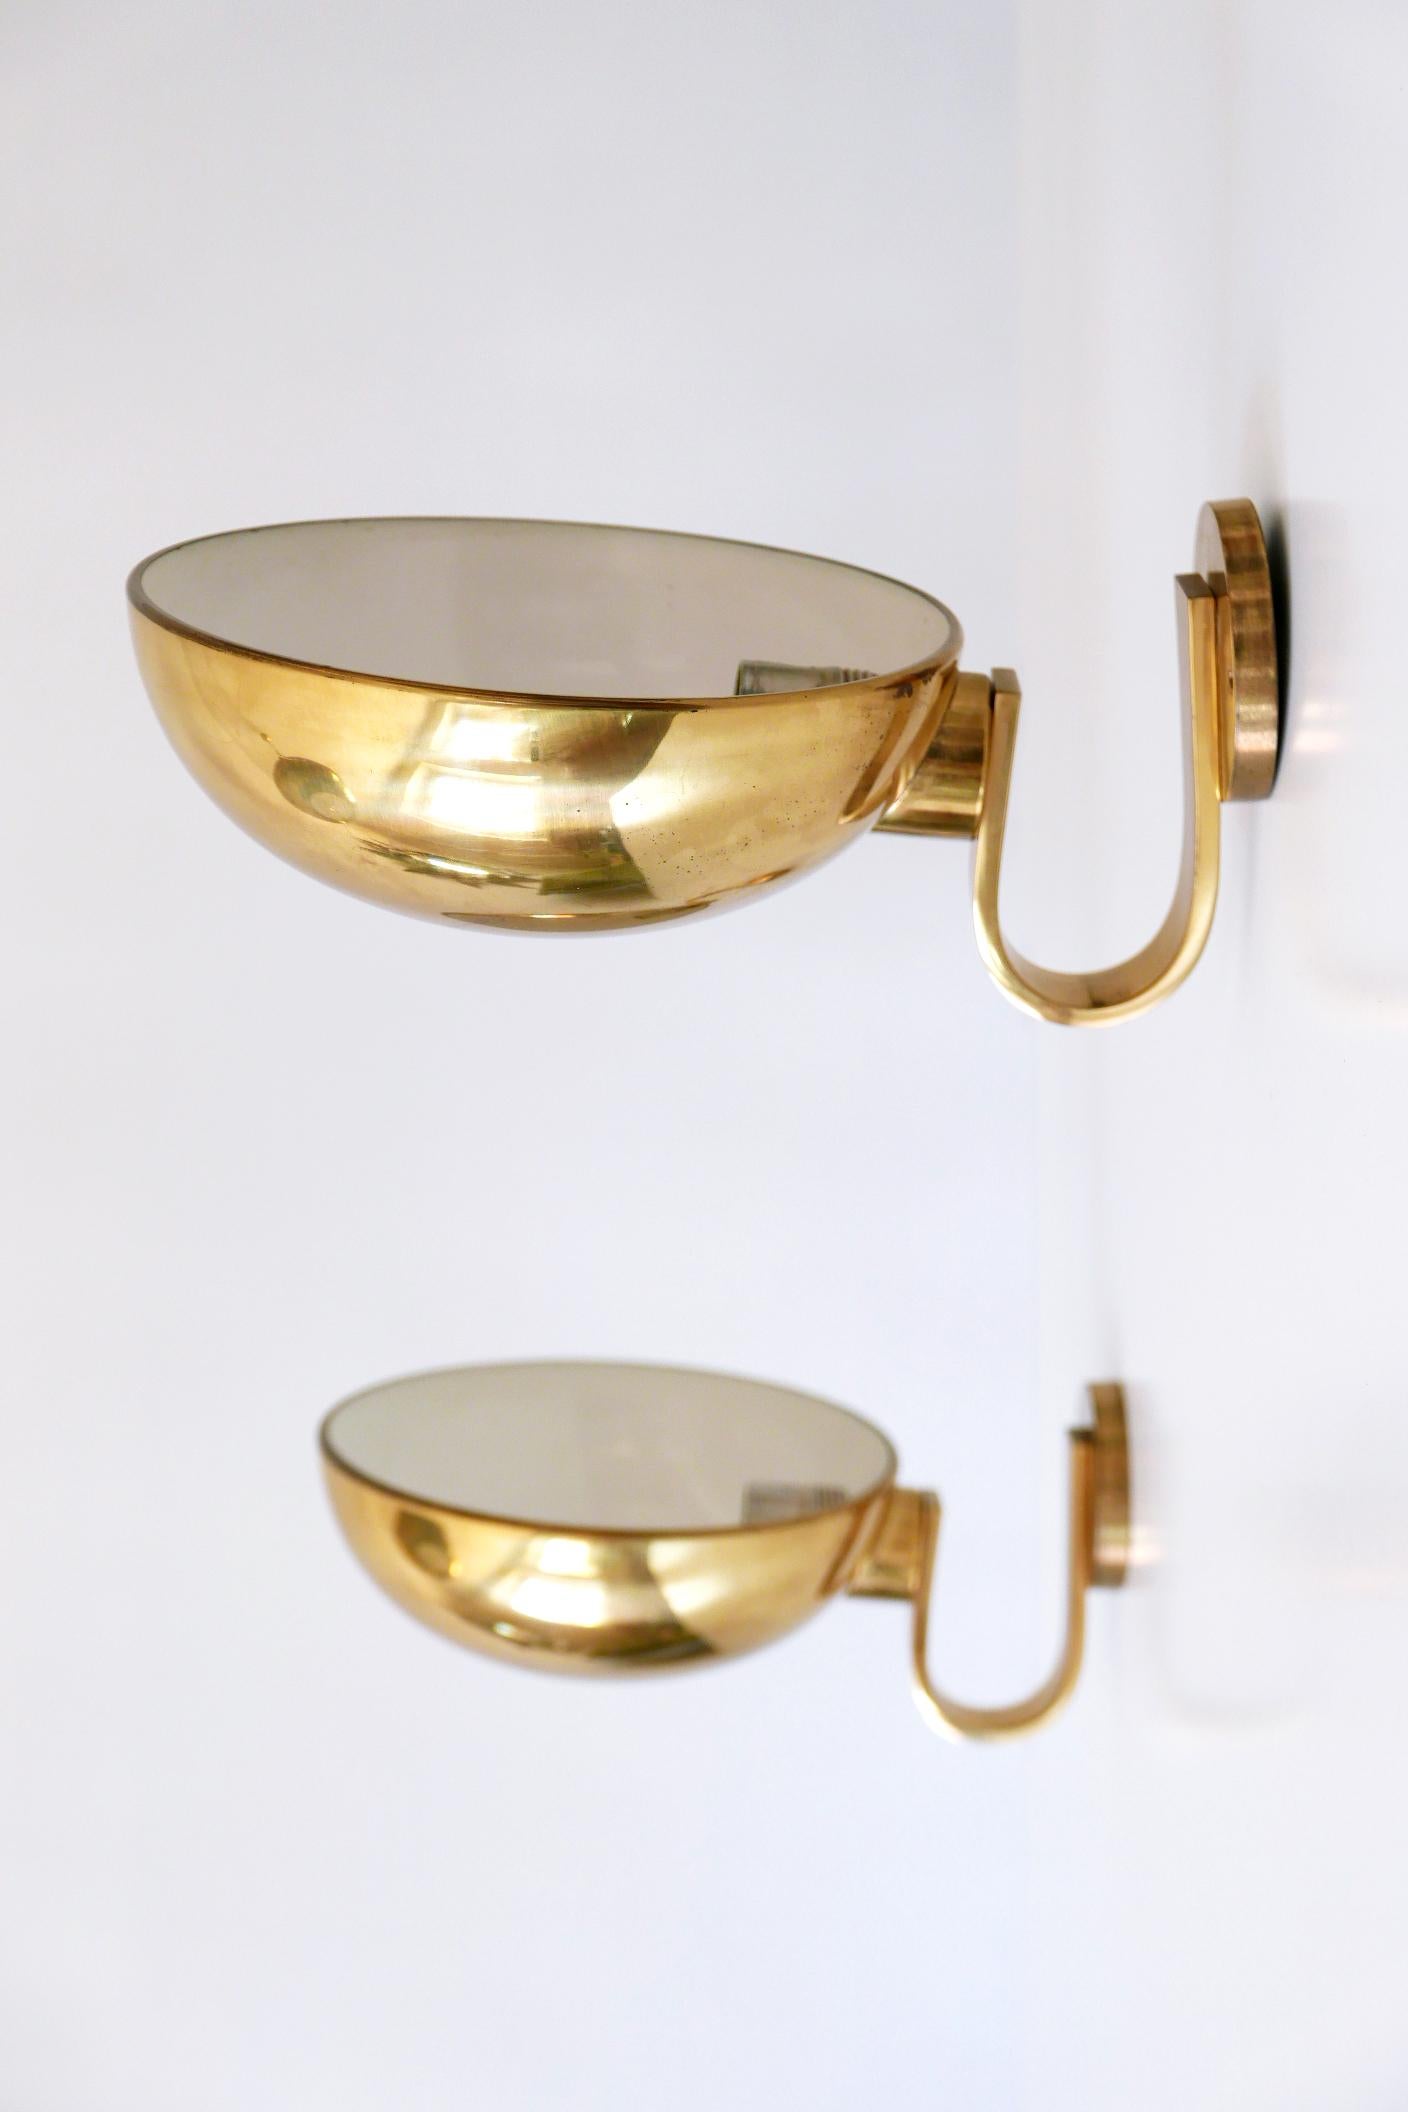 Set of Two Brass Wall Lamps or Sconces by Florian Schulz, 1970s, Germany 8